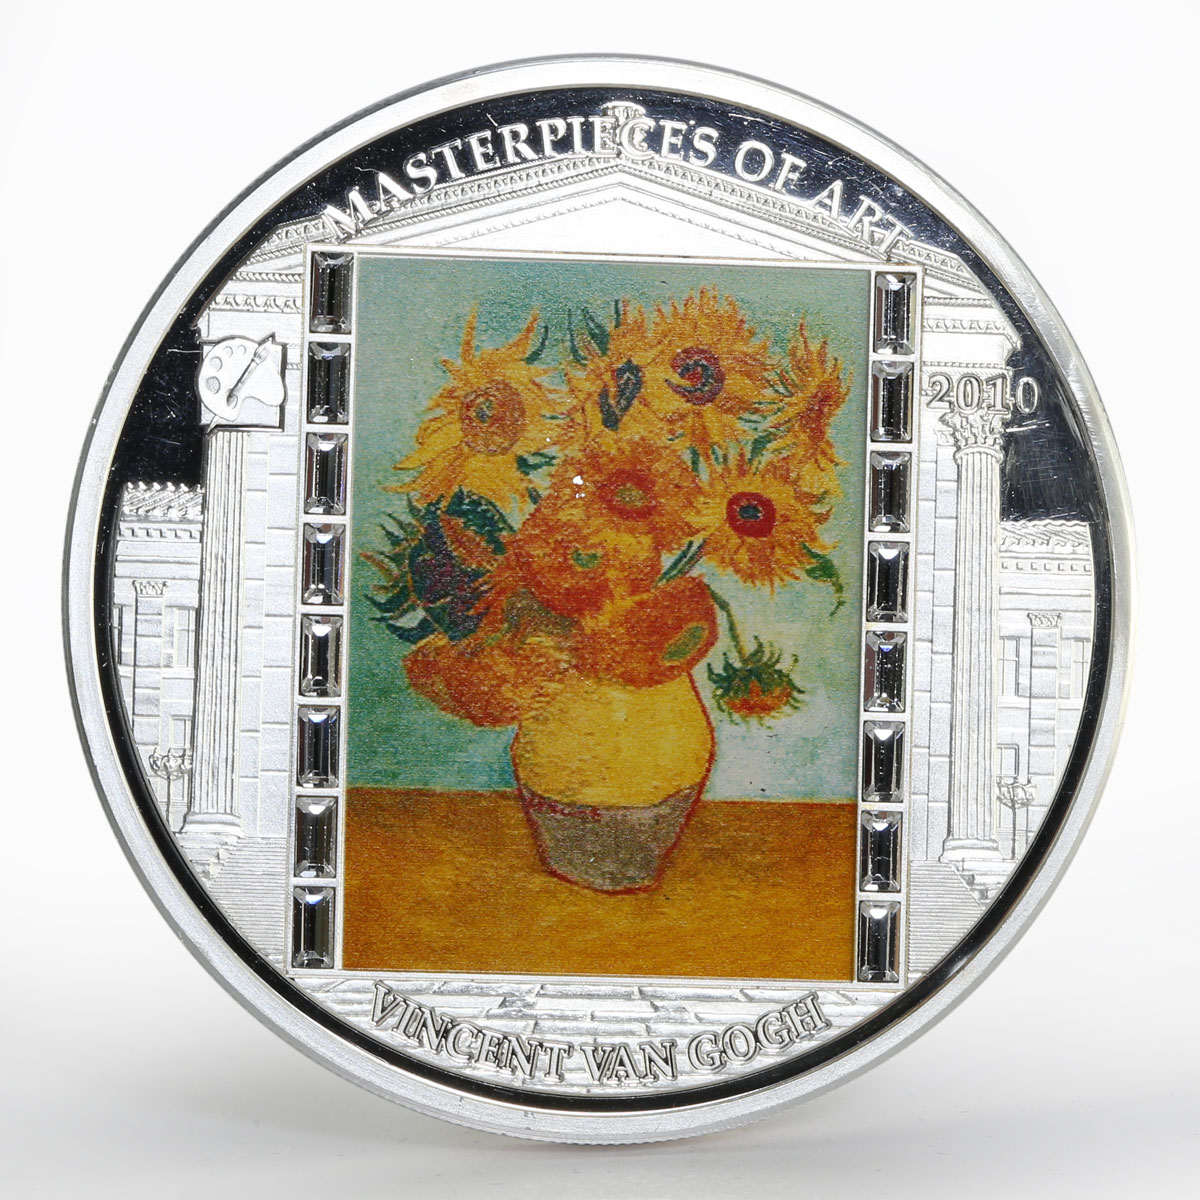 Cook Islands 20 dollars Vincent van Gogh Sunflowers colored proof silver 2010